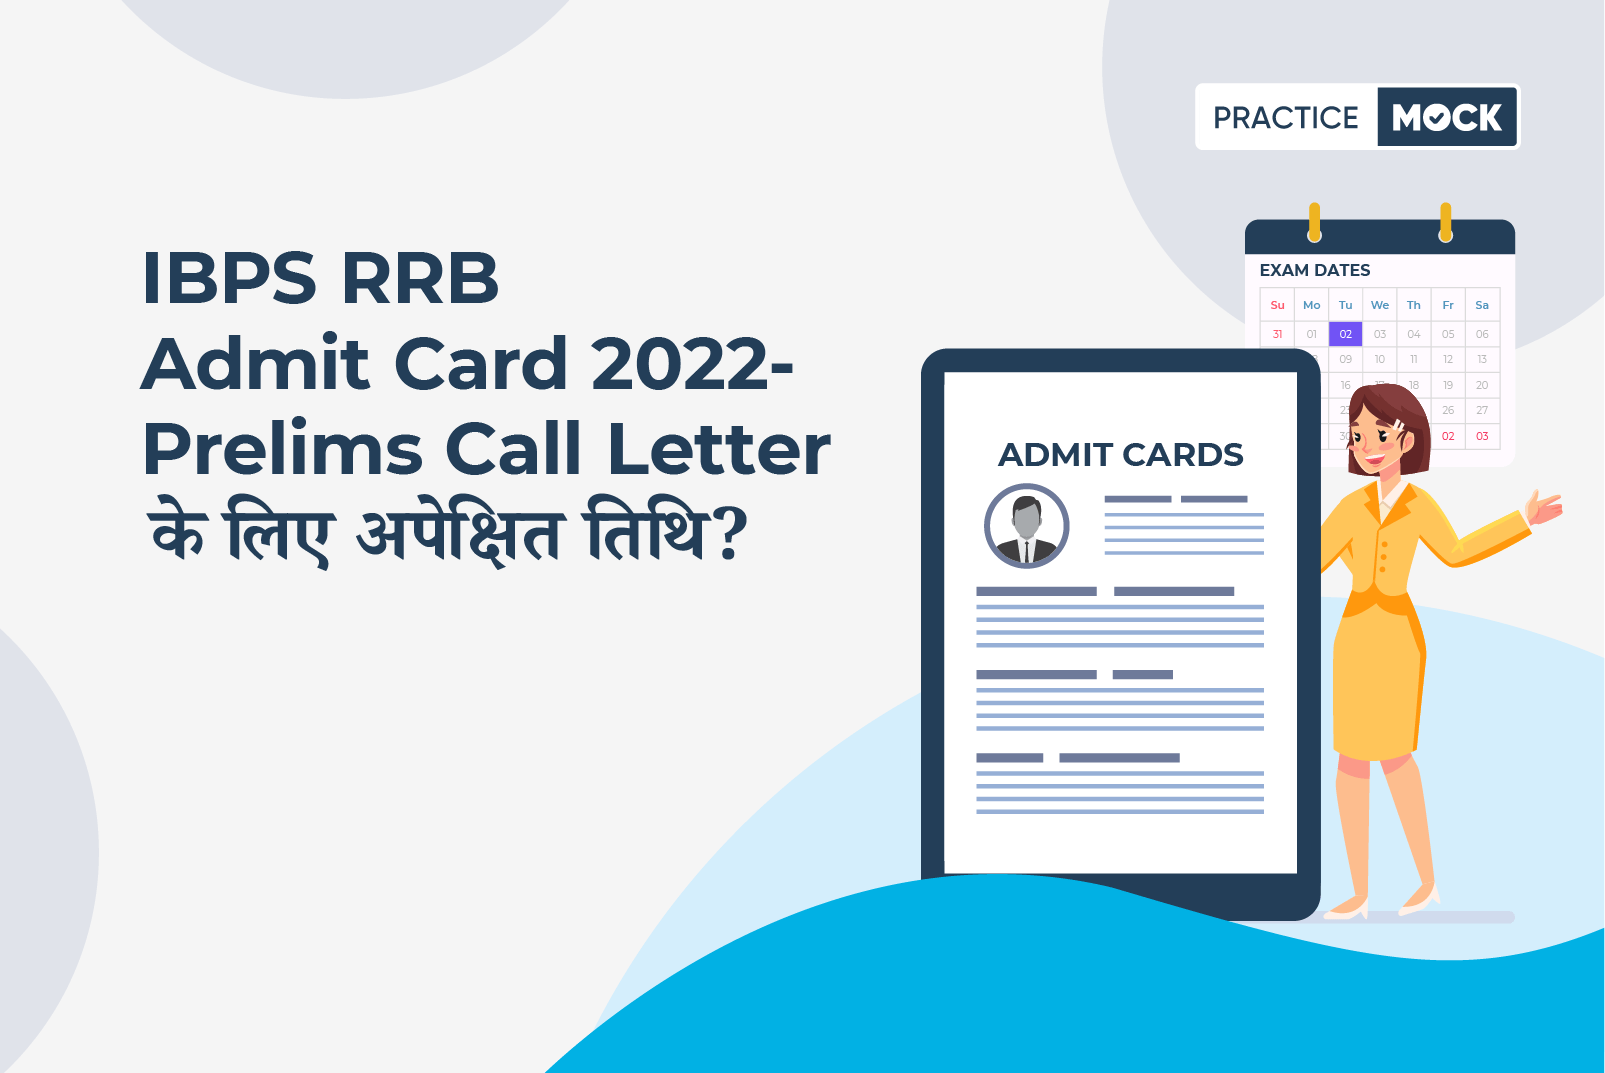 IBPS RRB Admit Card 2022-Expected Date for Prelims Call Letter